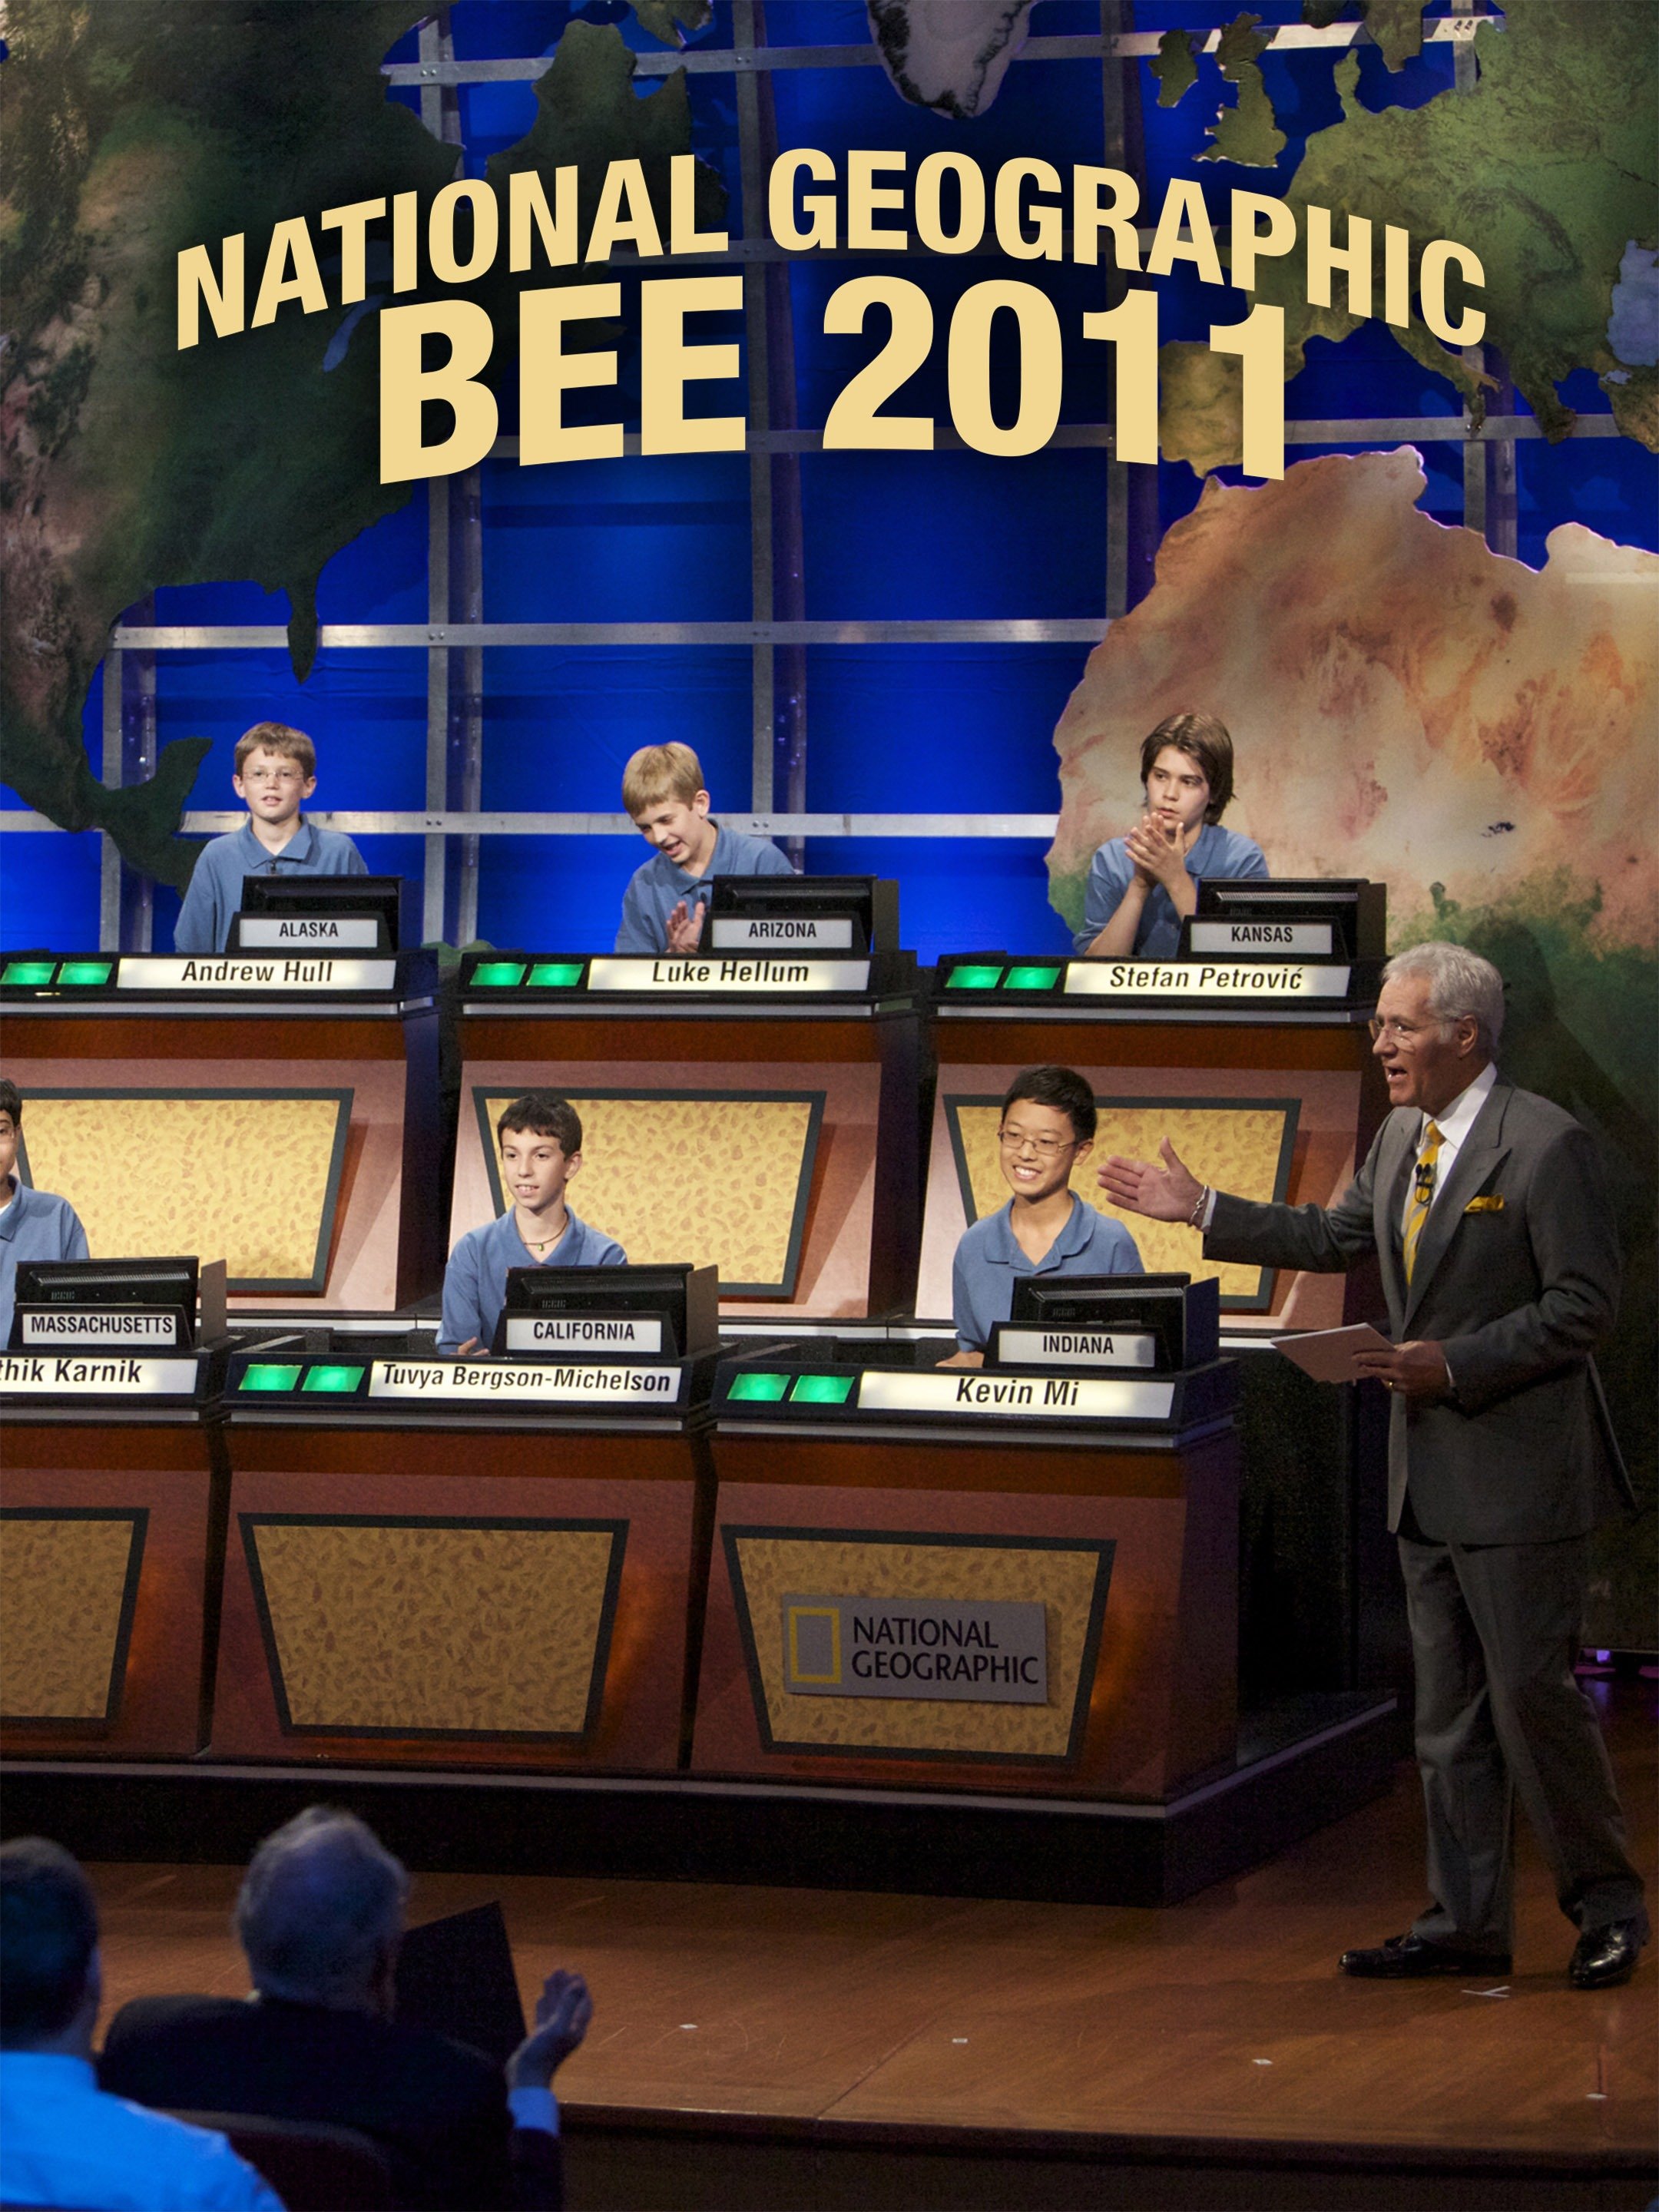 National Geographic Bee 2011 [DVD]